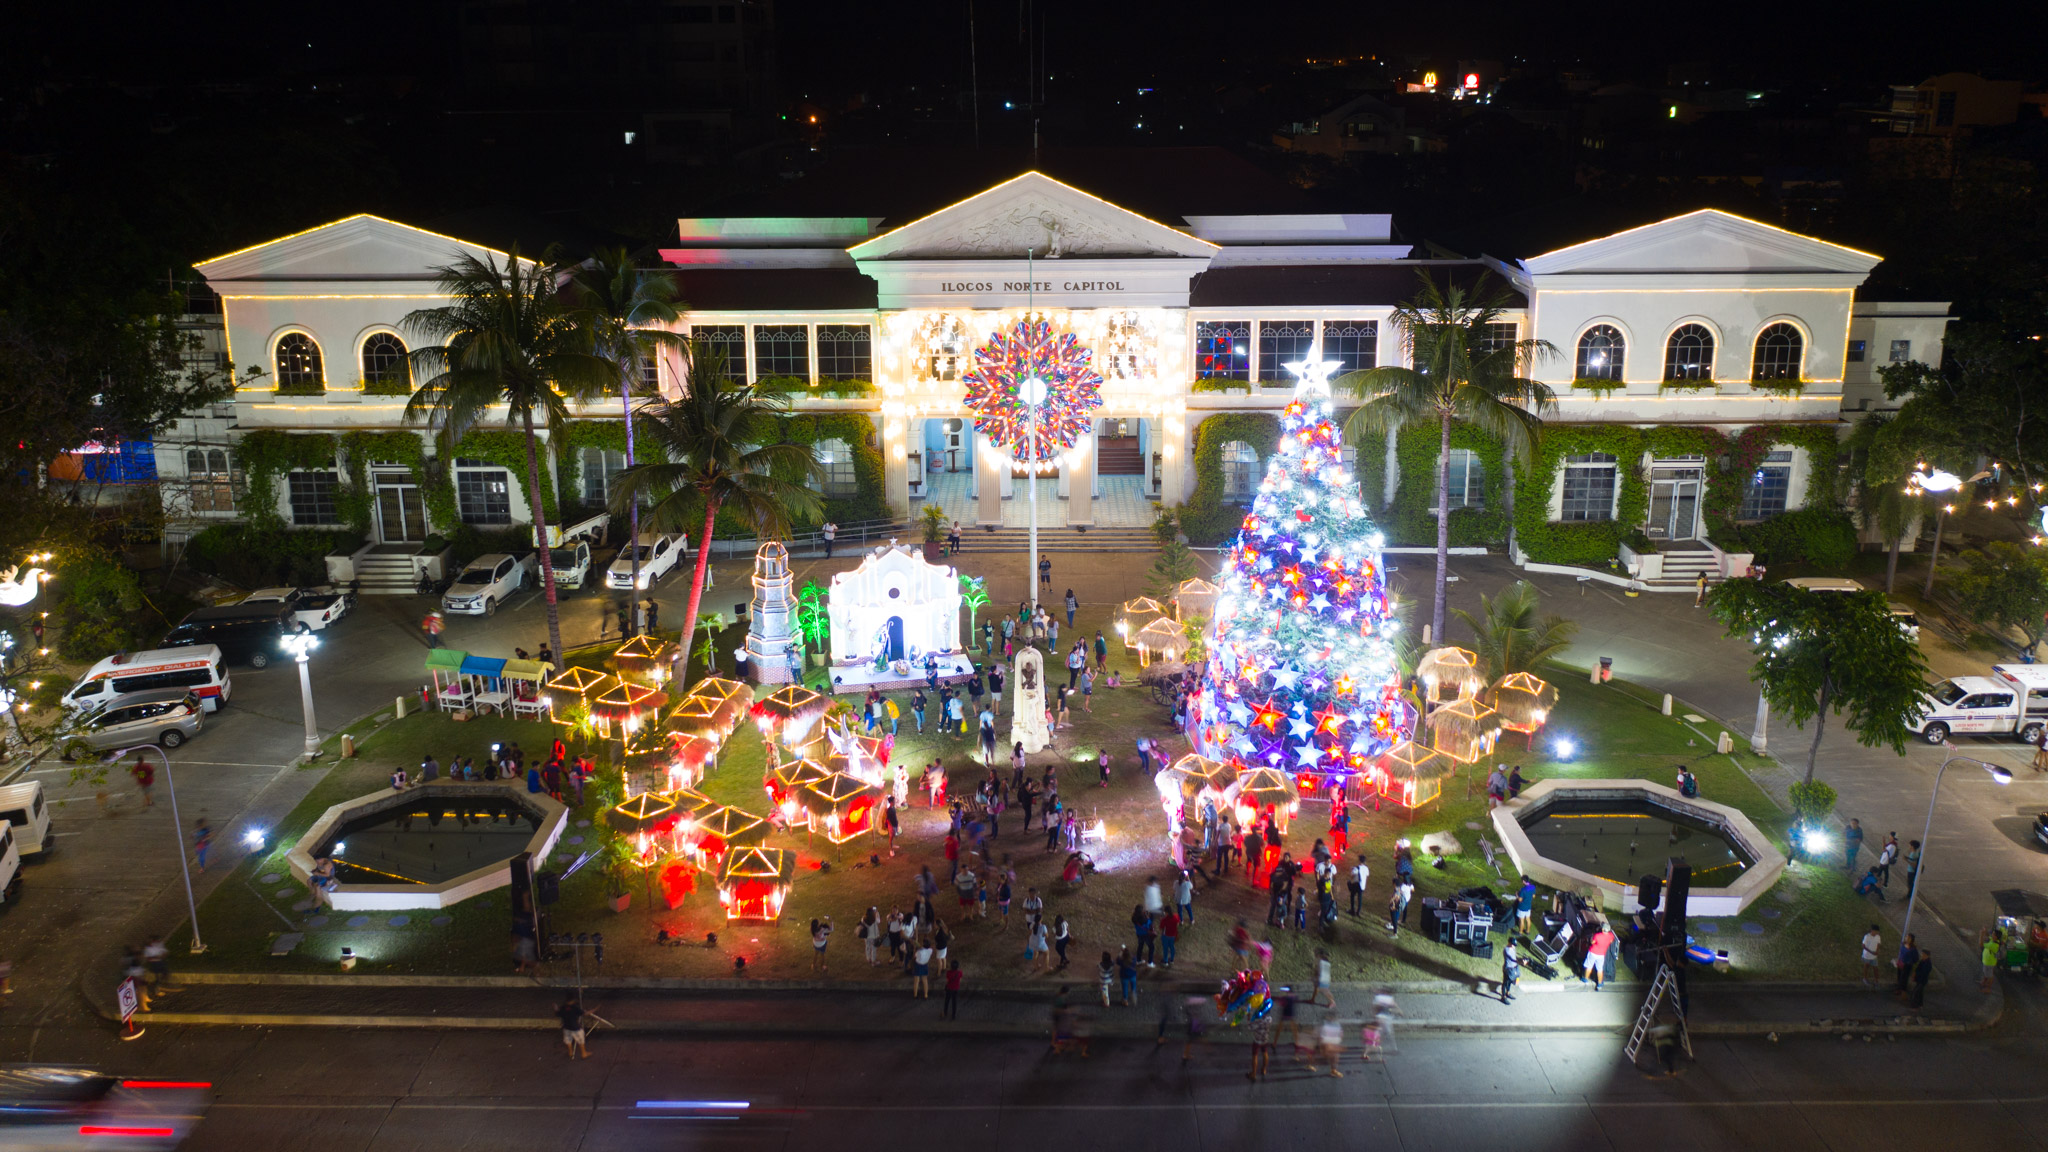 CHRISTMAS TREE MAGNET. A Christmas village at the heart of the city. This year’s Capitol Christmas tree light up features a recycled installation inspired by the Minor Basilica of St. John the Baptist Parish Church. Photograph:the Provincial Government of Ilocos Norte